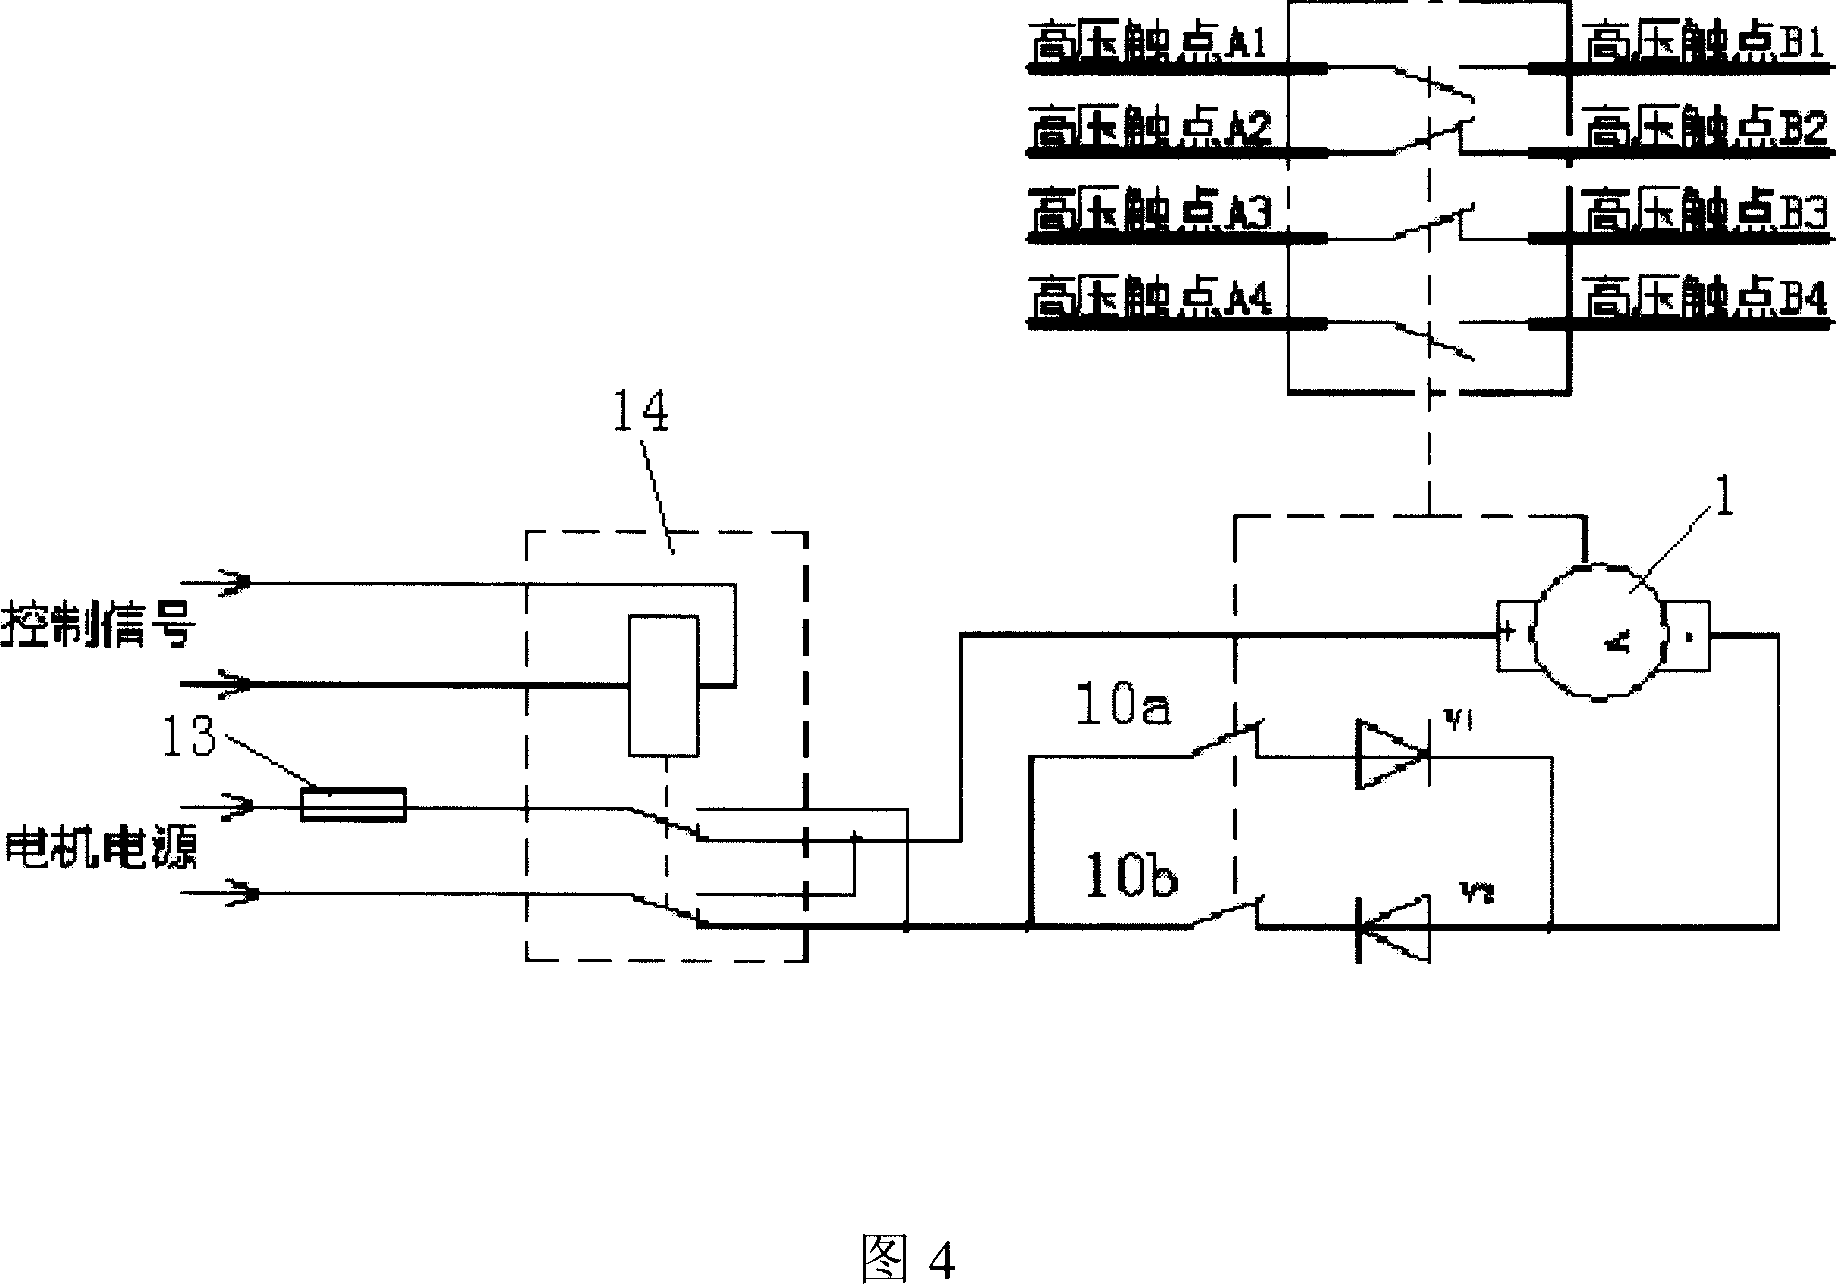 High-voltage automatic change-over switch